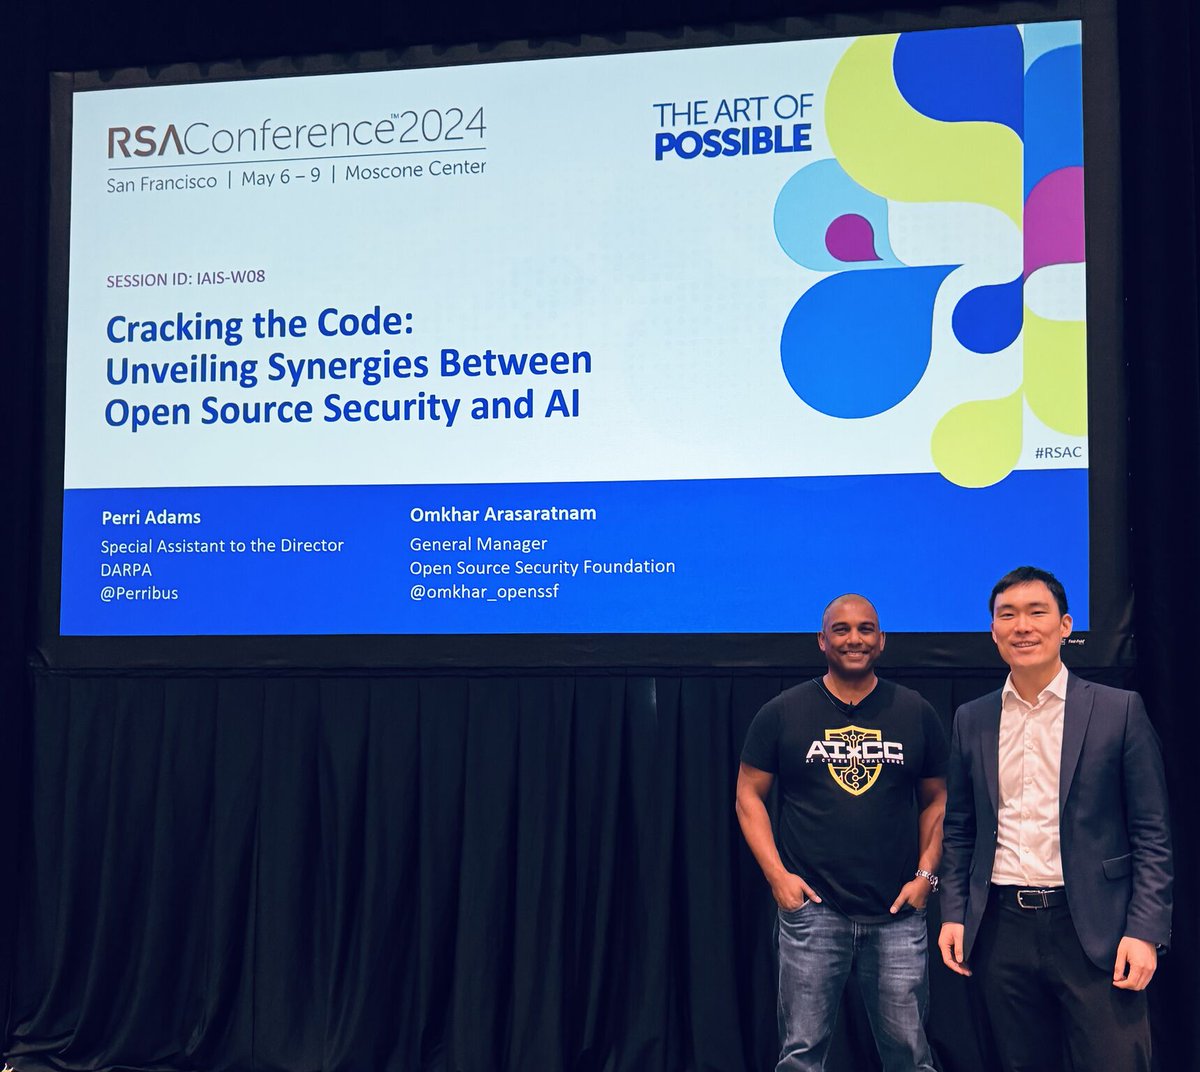 We had an absolute blast at @RSAConference in San Francisco! 🚀🚀 It was a great week of learning, networking & just having plain old fun. 😎 See you next year at #RSAC! 👋 #cybersecurity #missioncritical #devsecops #security